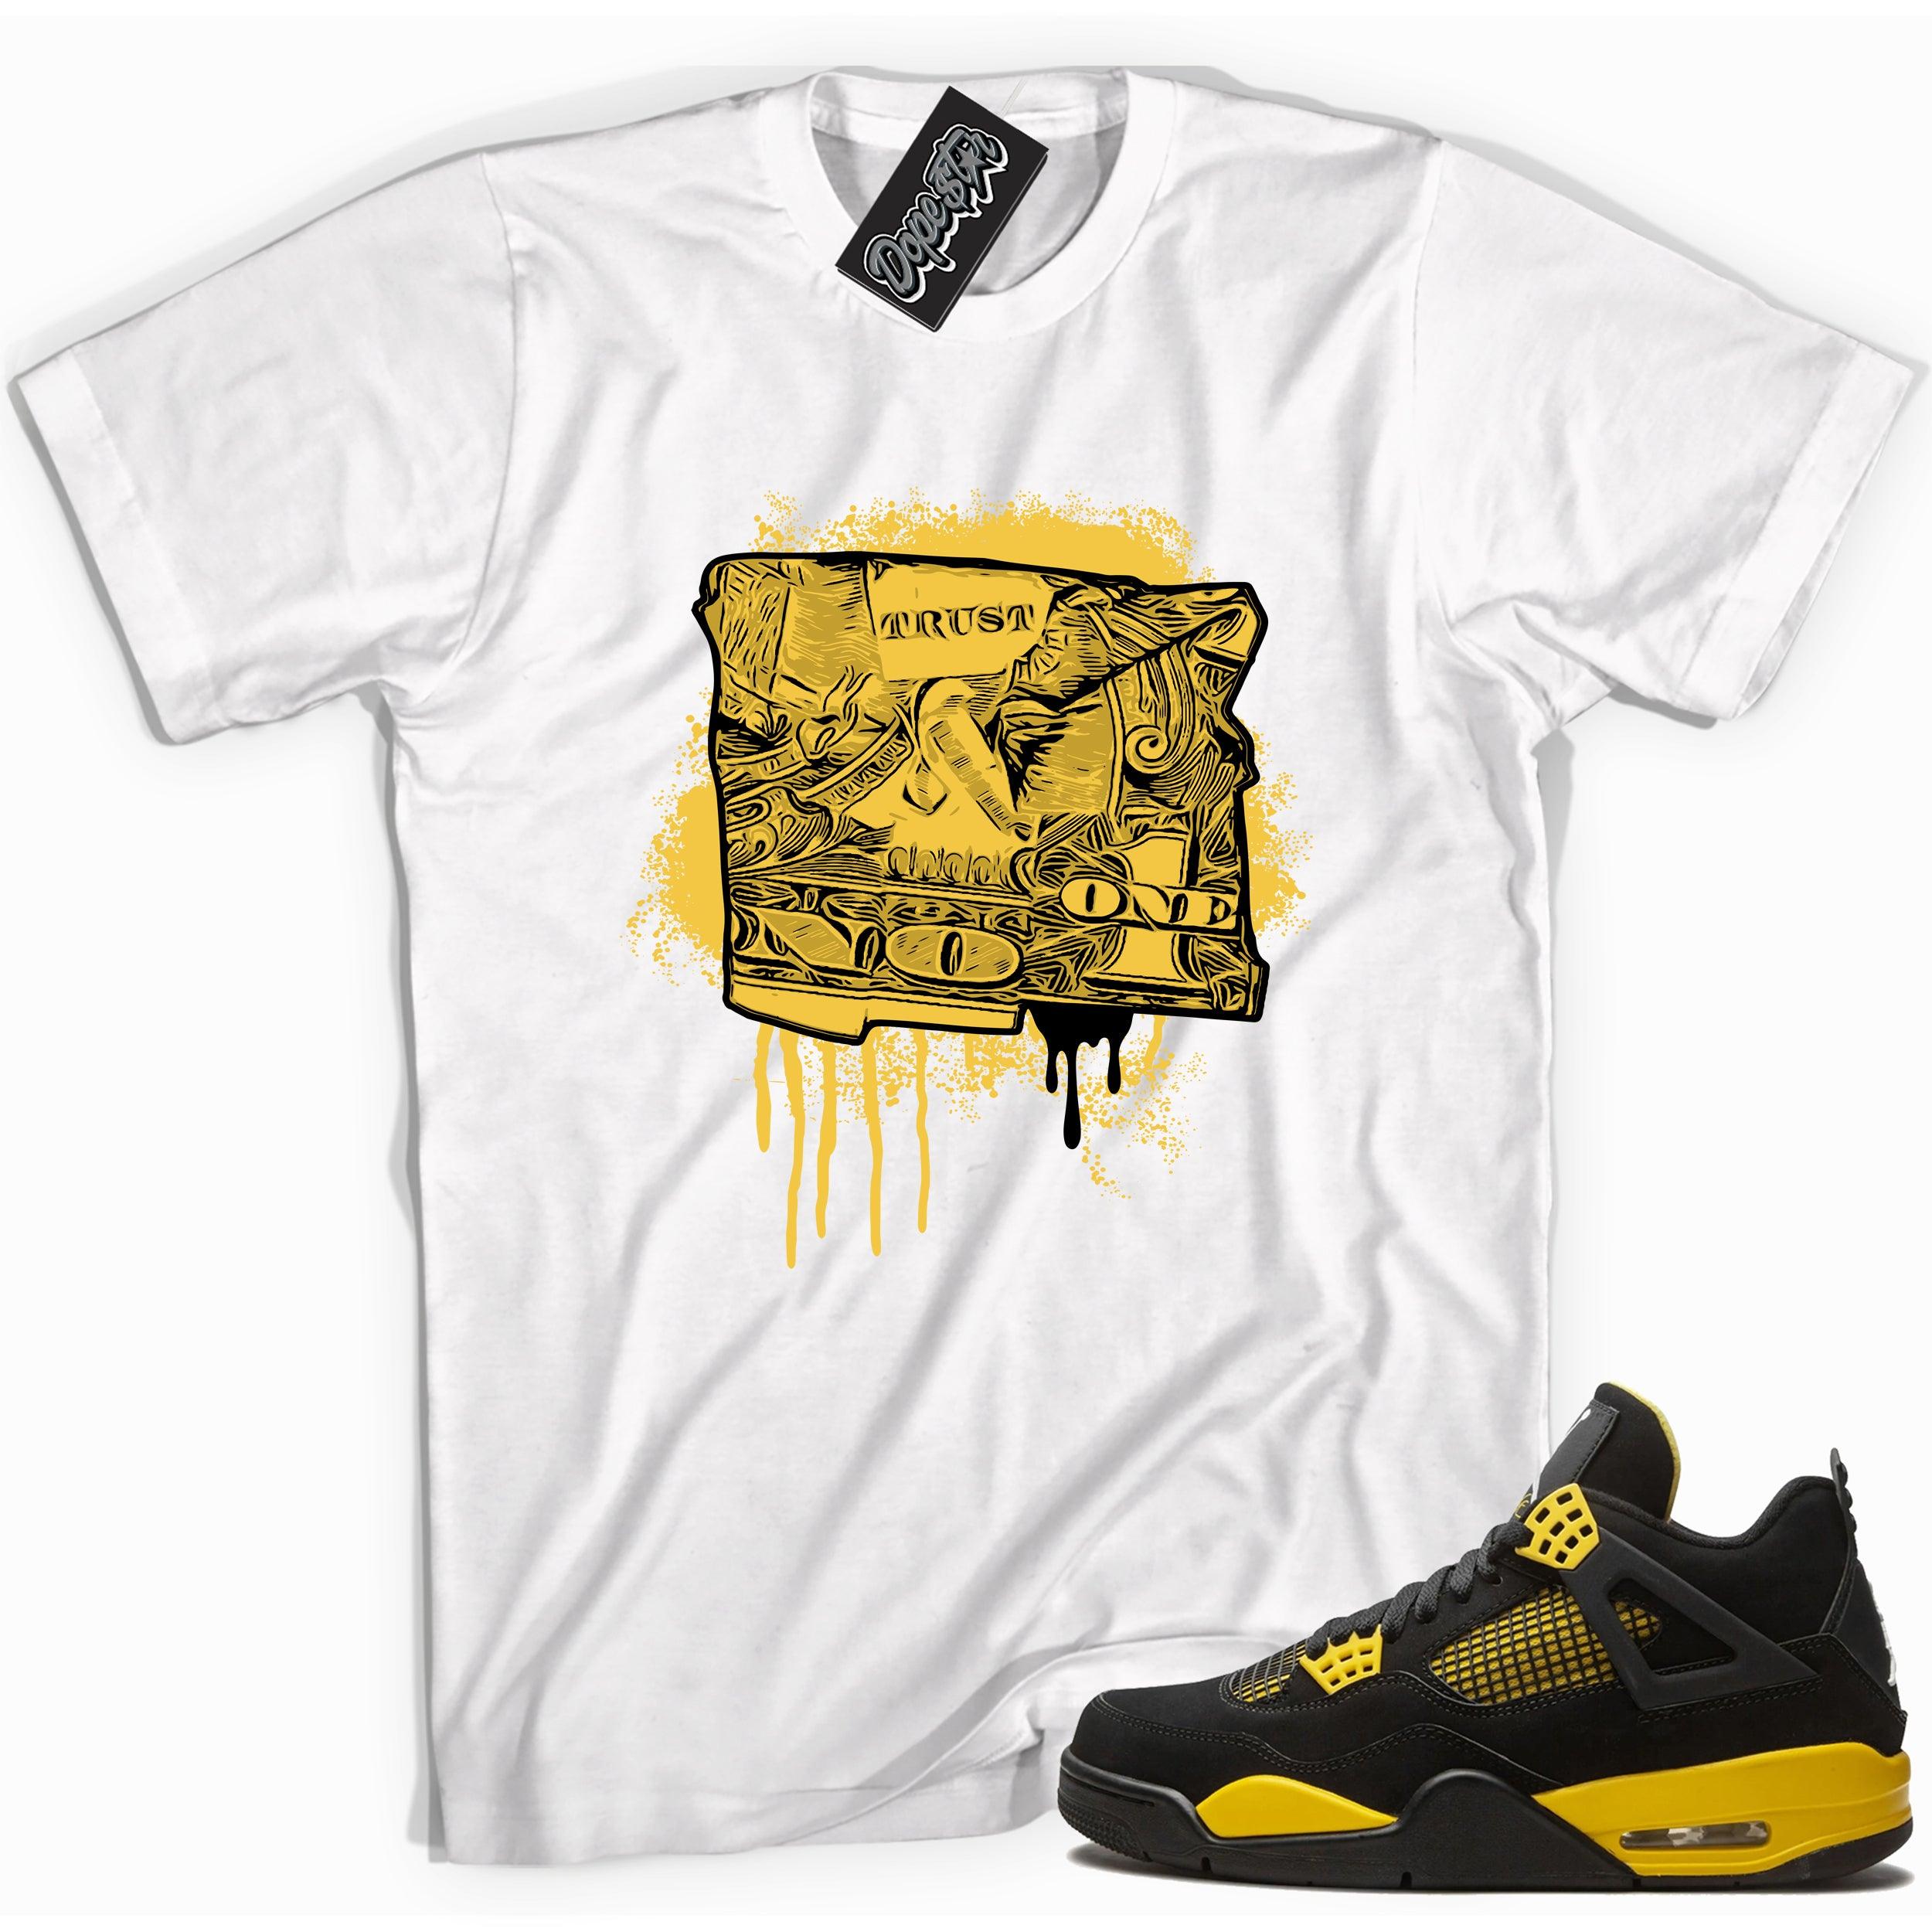 Cool white graphic tee with 'tru$t no one dollar' print, that perfectly matches Air Jordan 4 Thunder sneakers